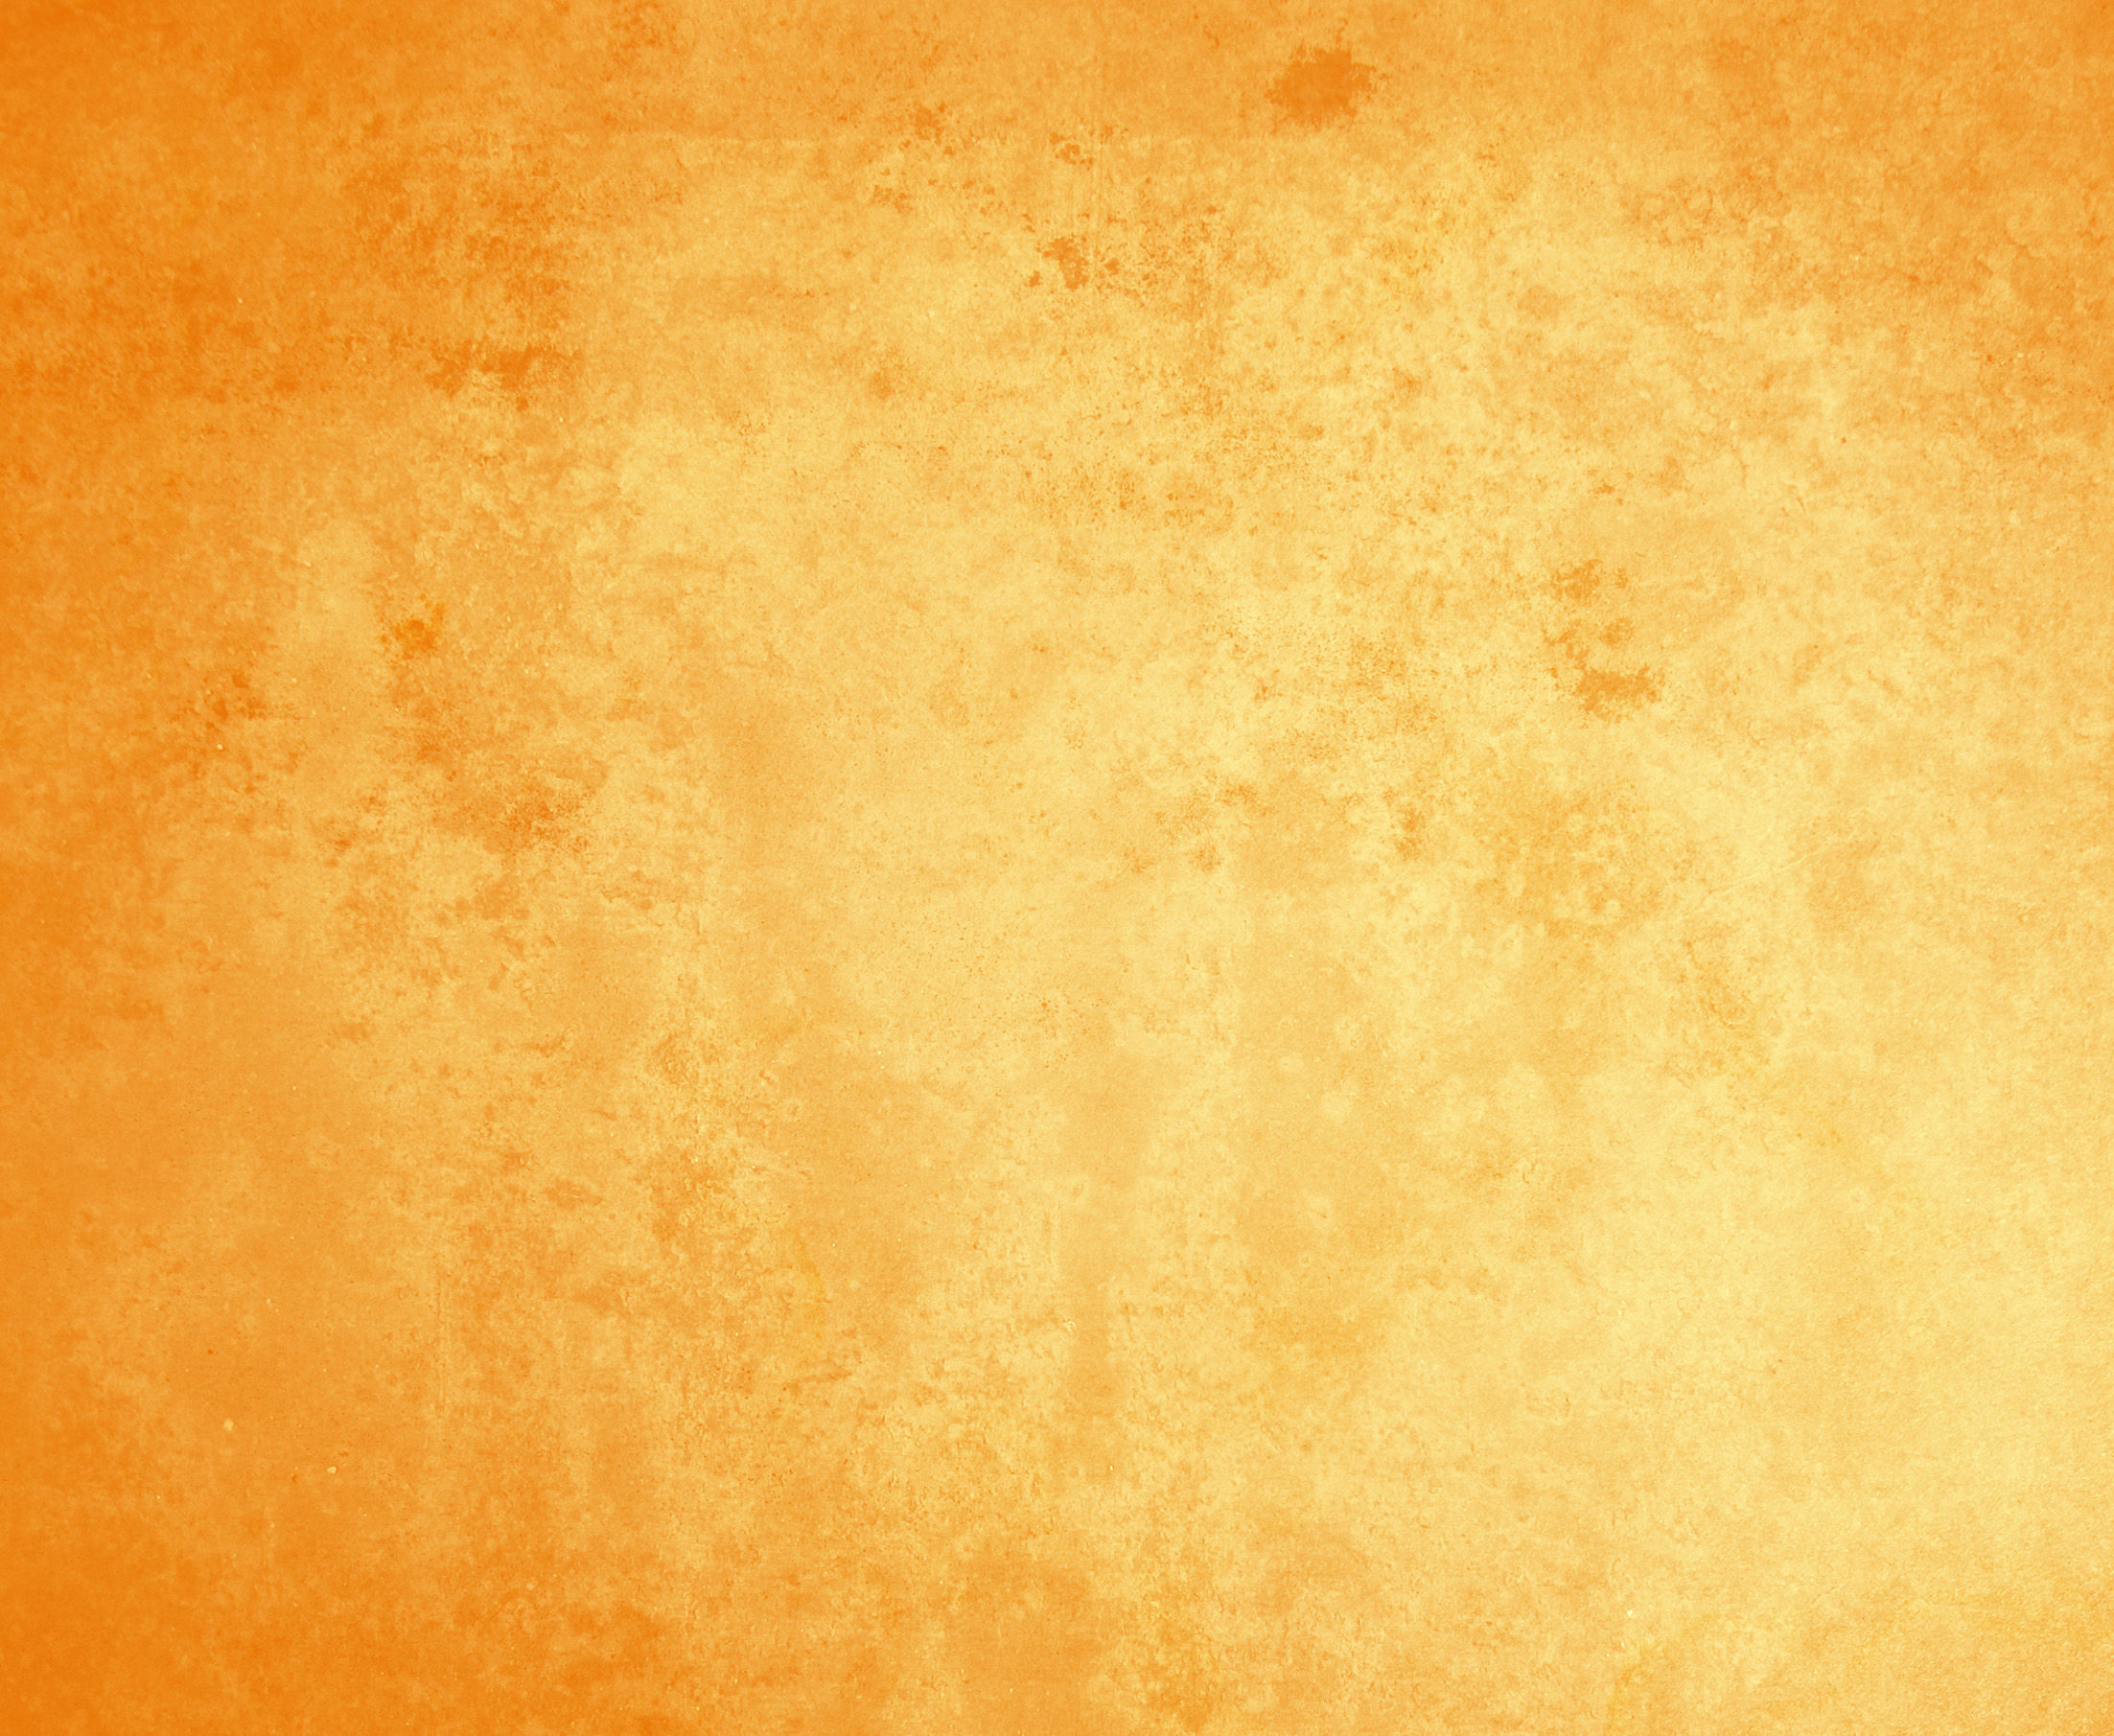 Light Orange Distressed Design Backgrounds For Powerpoint Templates Ppt Backgrounds